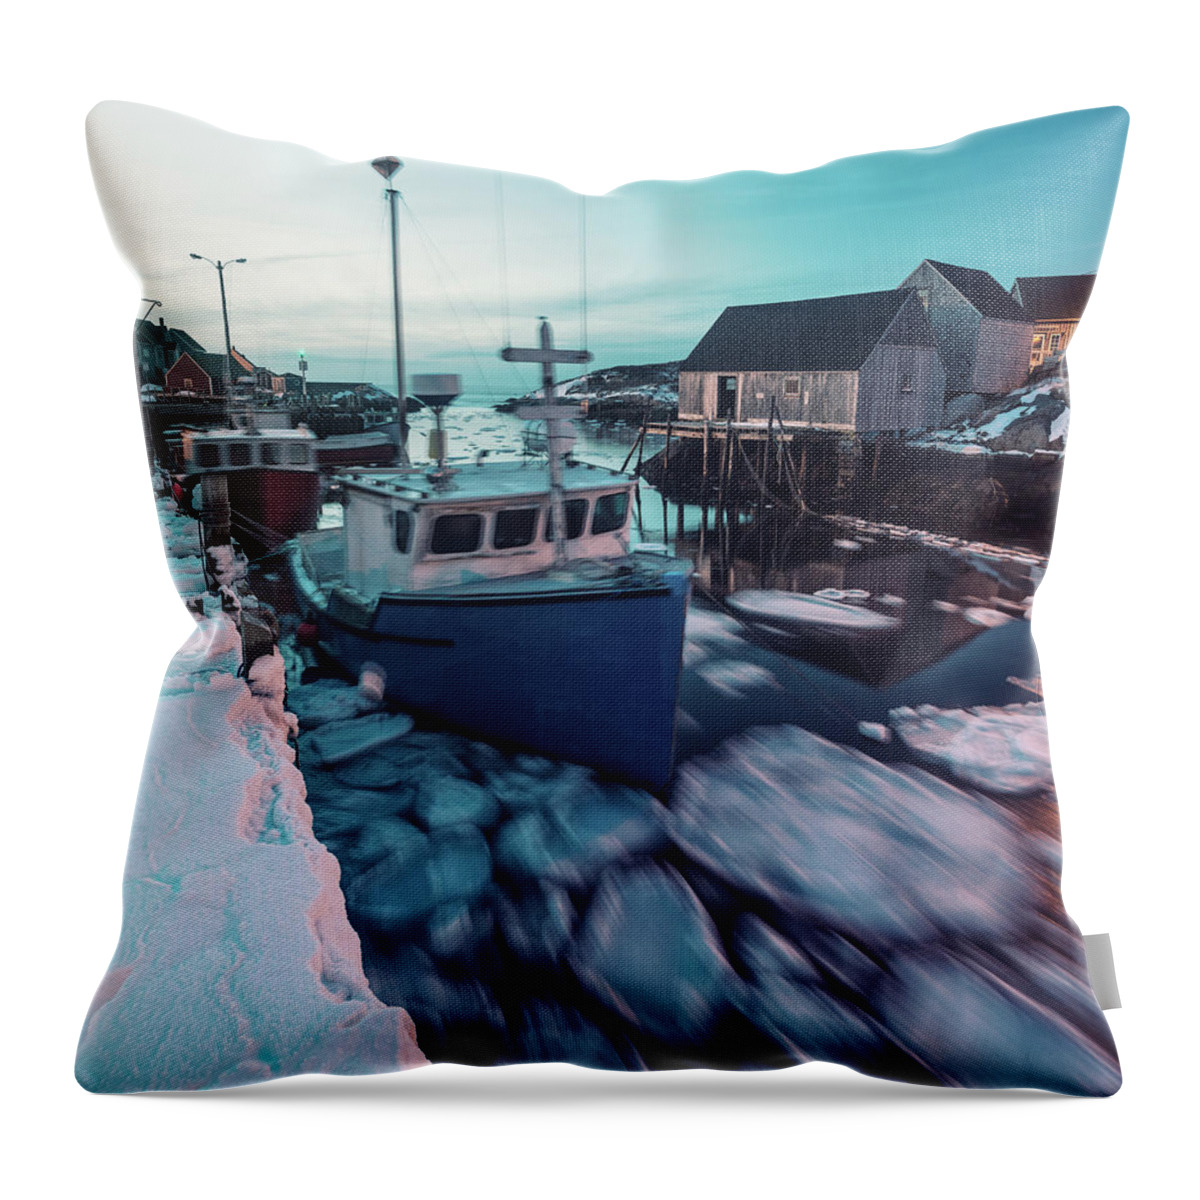 Scenics Throw Pillow featuring the photograph Ice Cakes In Motion by Shaunl